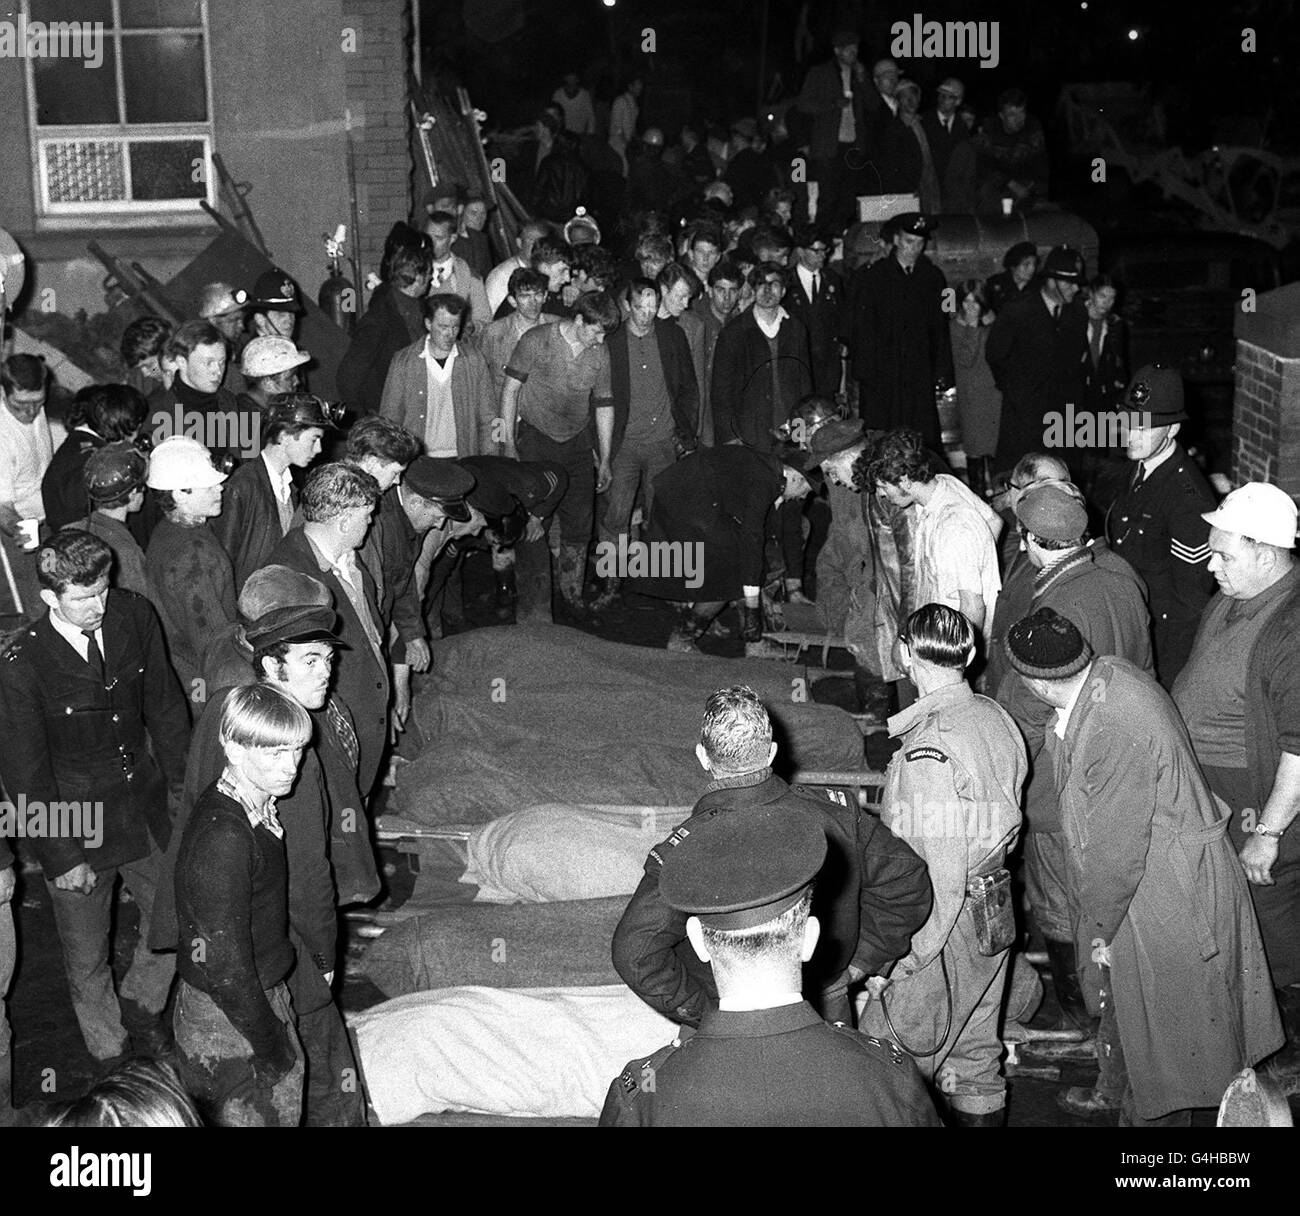 Surrounded by rescue workers and sorrowing villagers, blanket-covered bodies of children are lined up on stretchers outside Pantglas Junior School, Aberfan, Glamorganshire. Many of the school's pupils died when the village was struck by thousands of tons of coal dust and earth which avalanched down from a colliery tip. Stock Photo